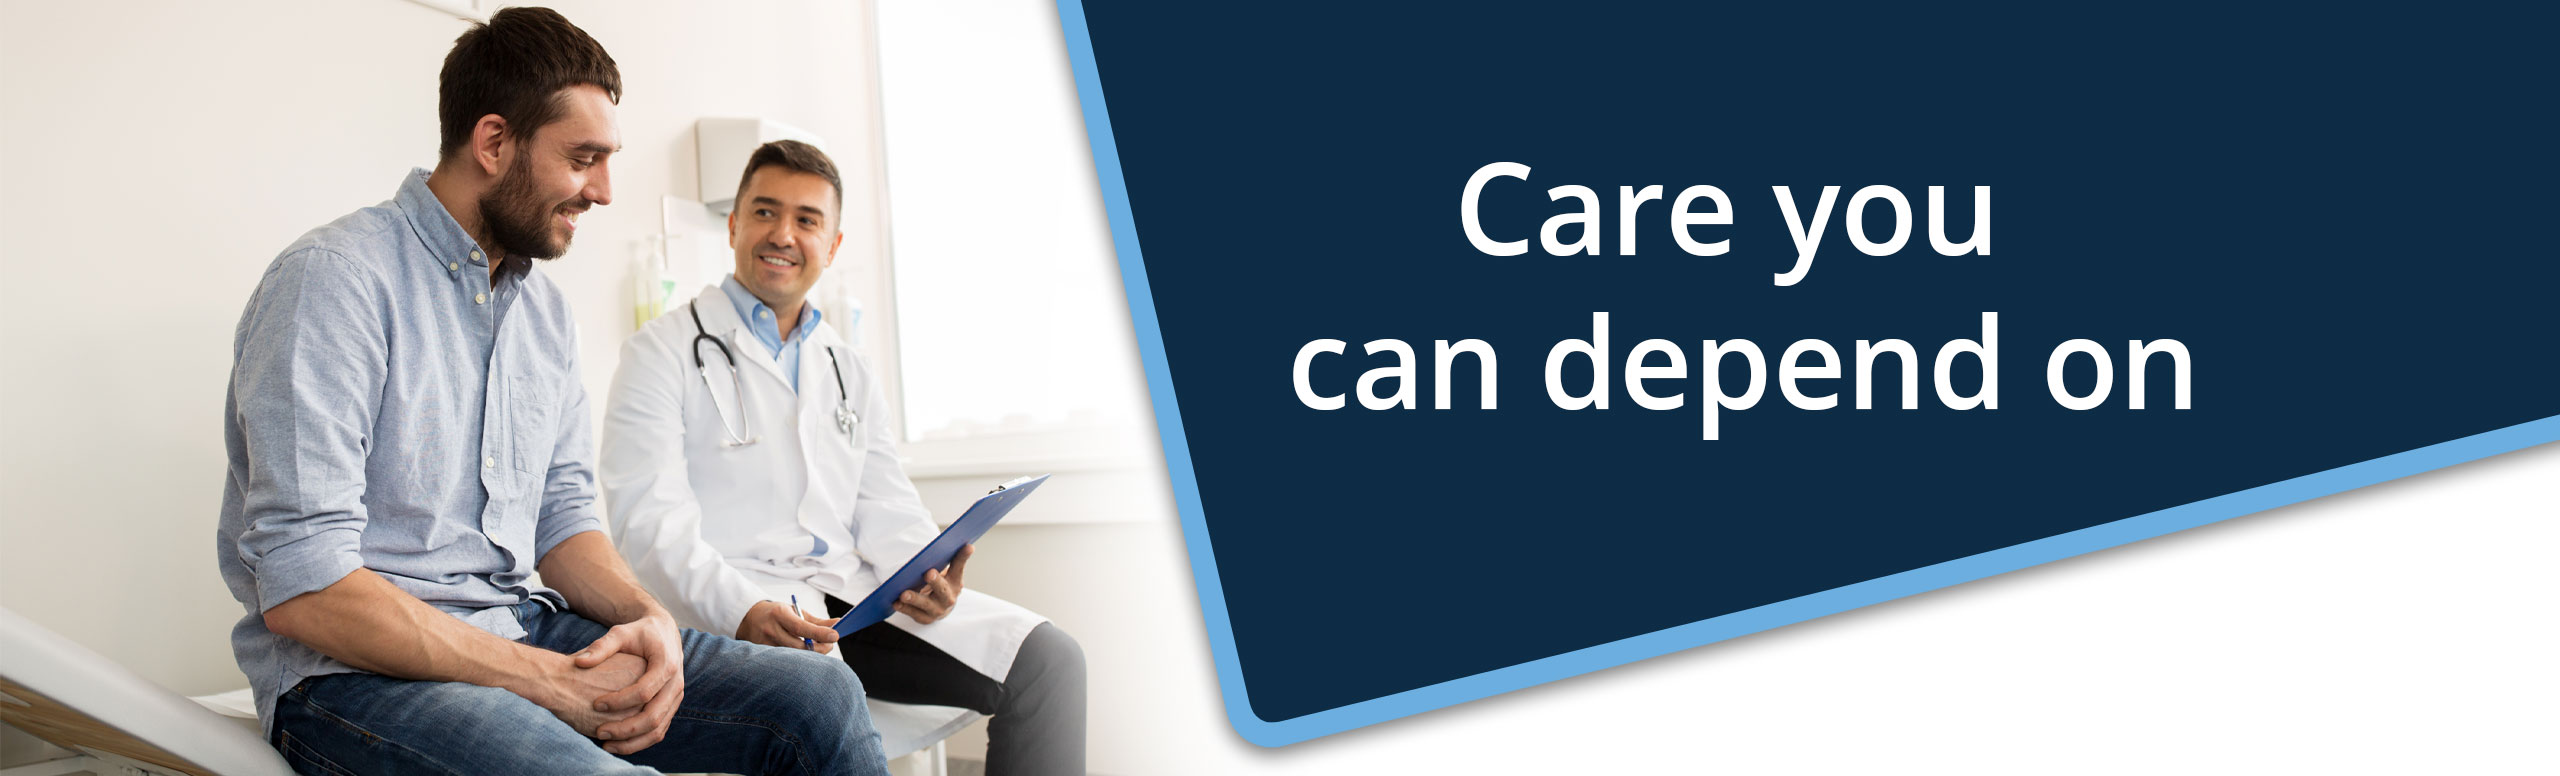 Banner picture of a male patient sitting next to a male Physician. They are both smiling. Banner says:

Care you can depend on